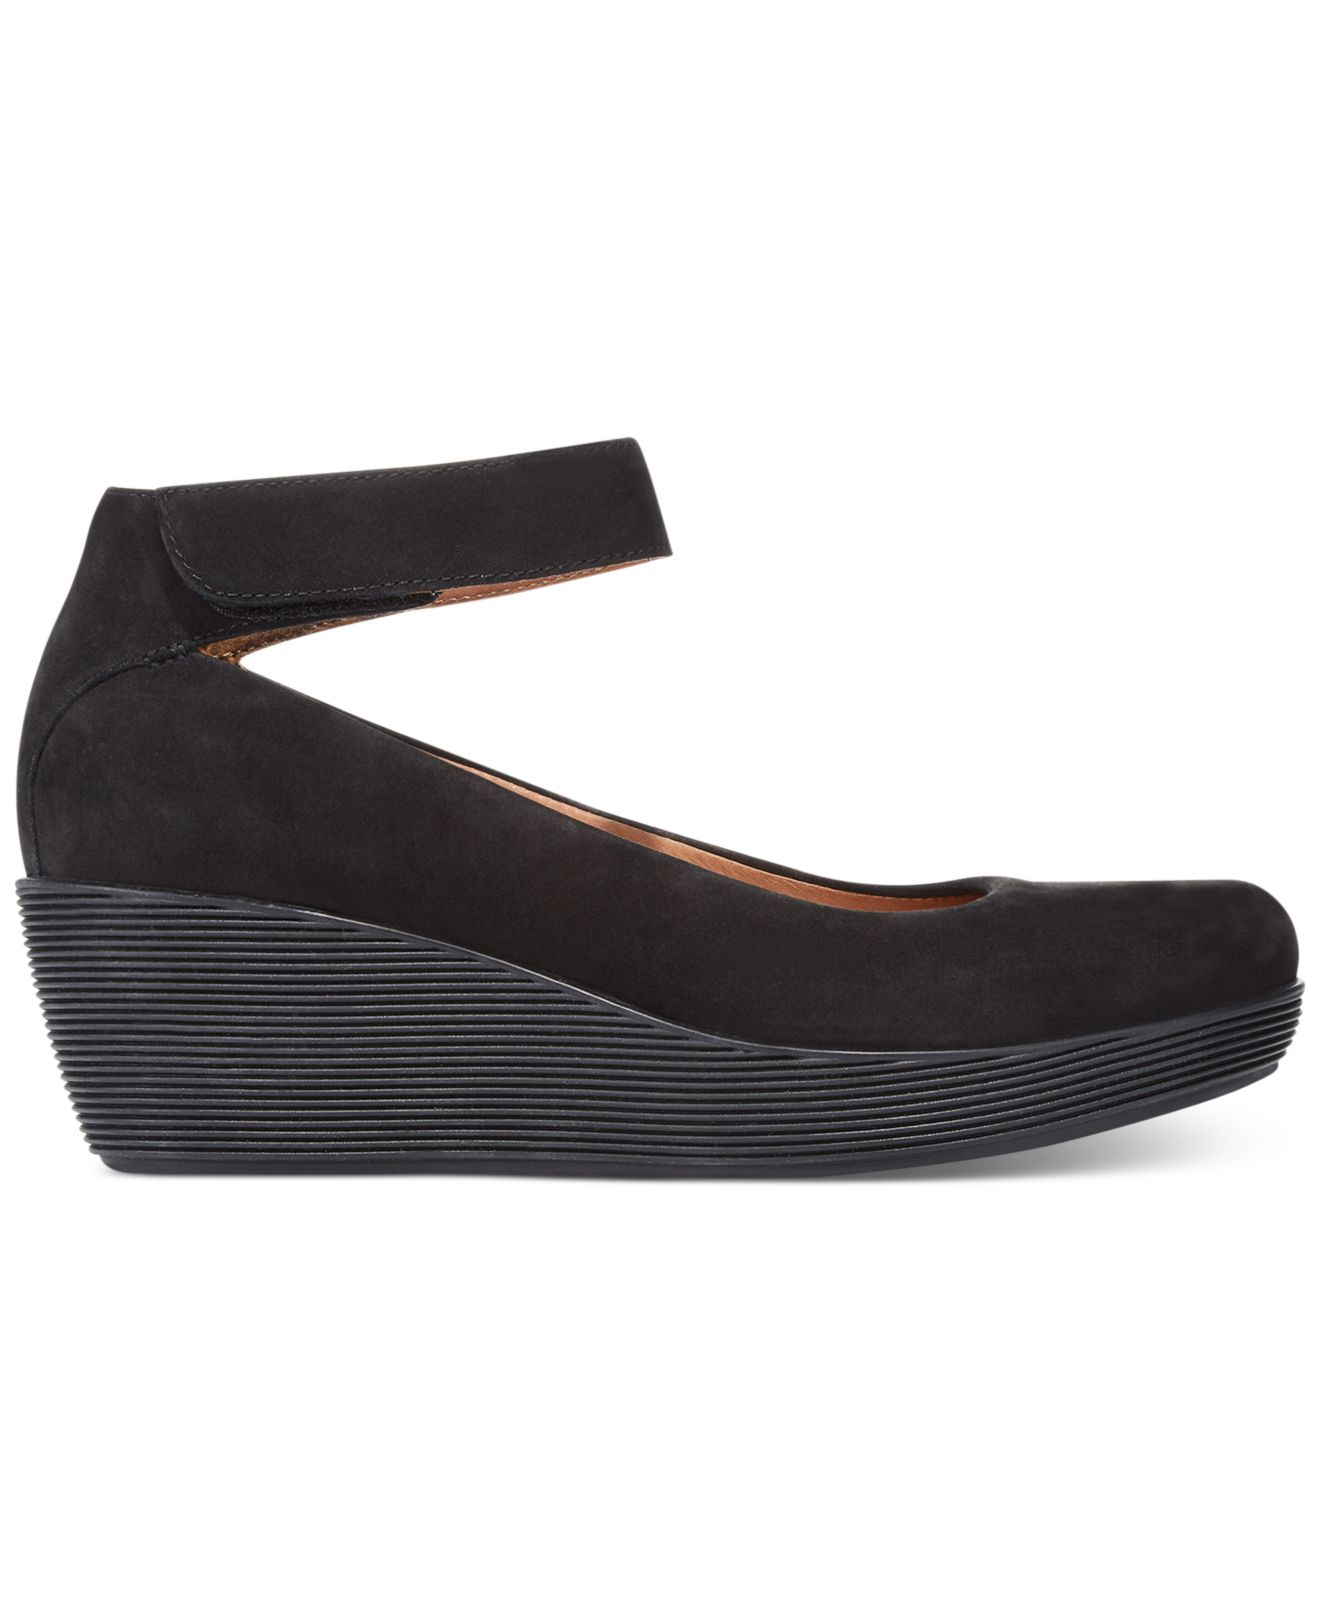 Clarks Wedge Shoes Clearance, SAVE 60% - pacificlanding.ca